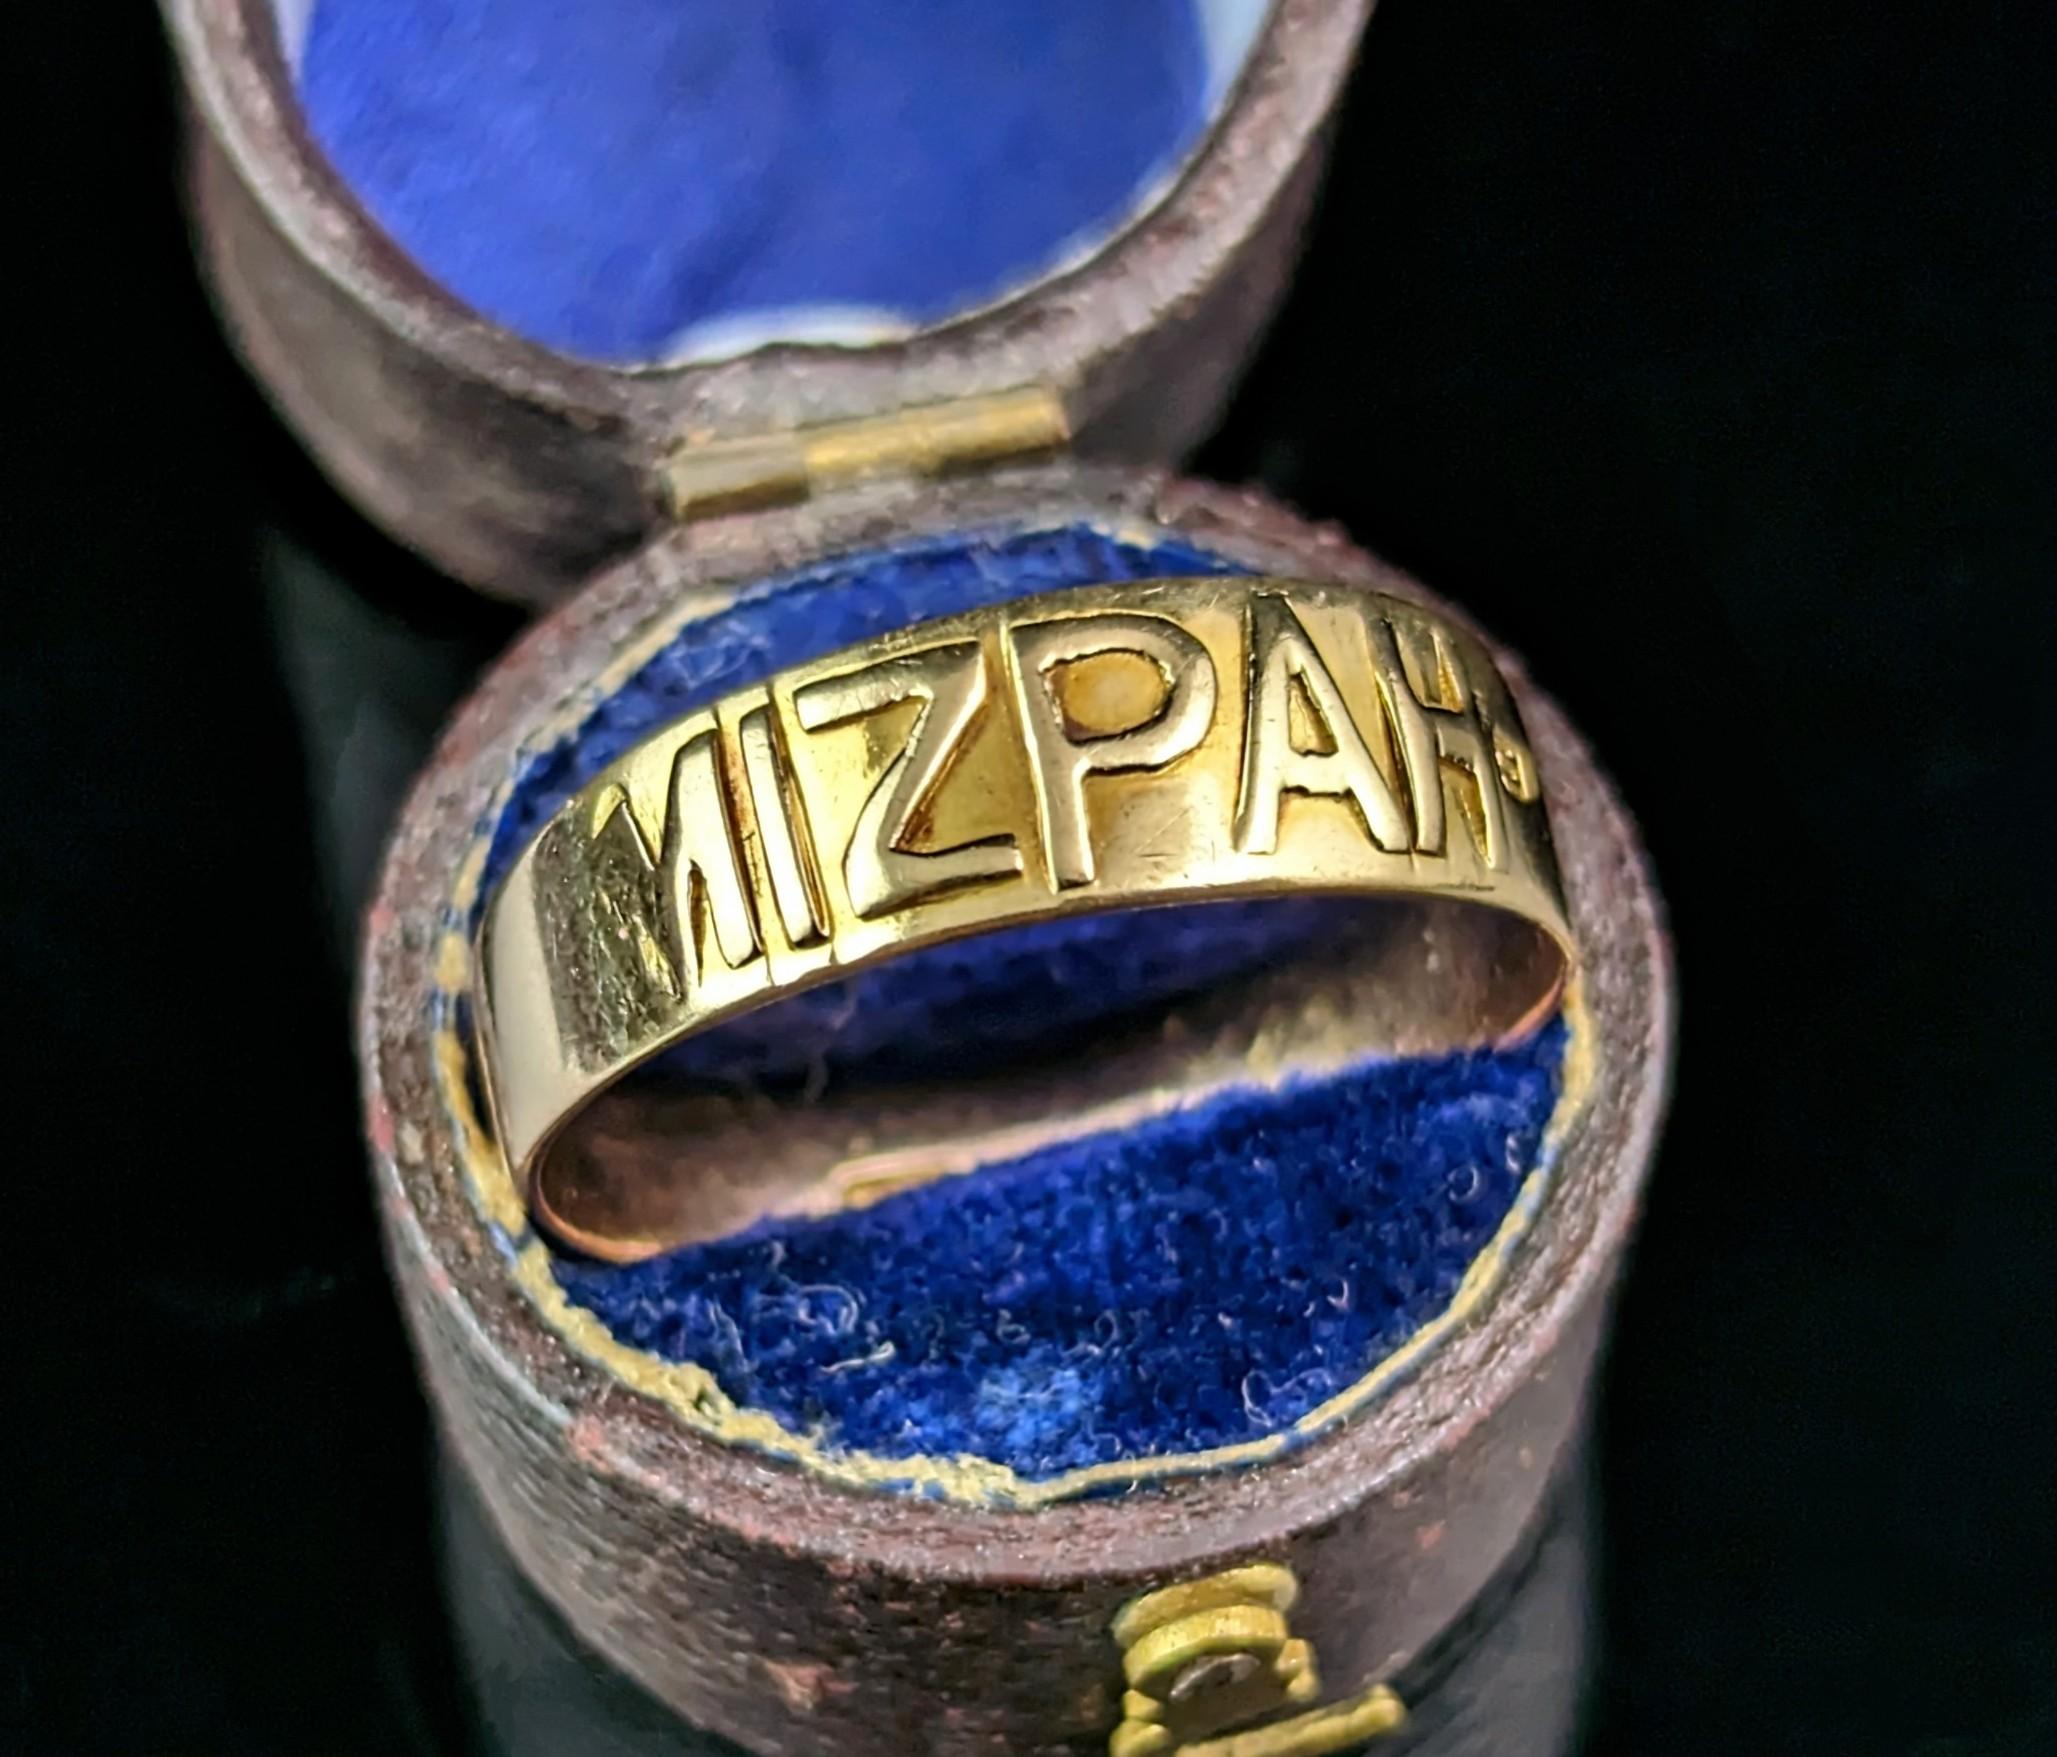 what does mizpah mean on a ring